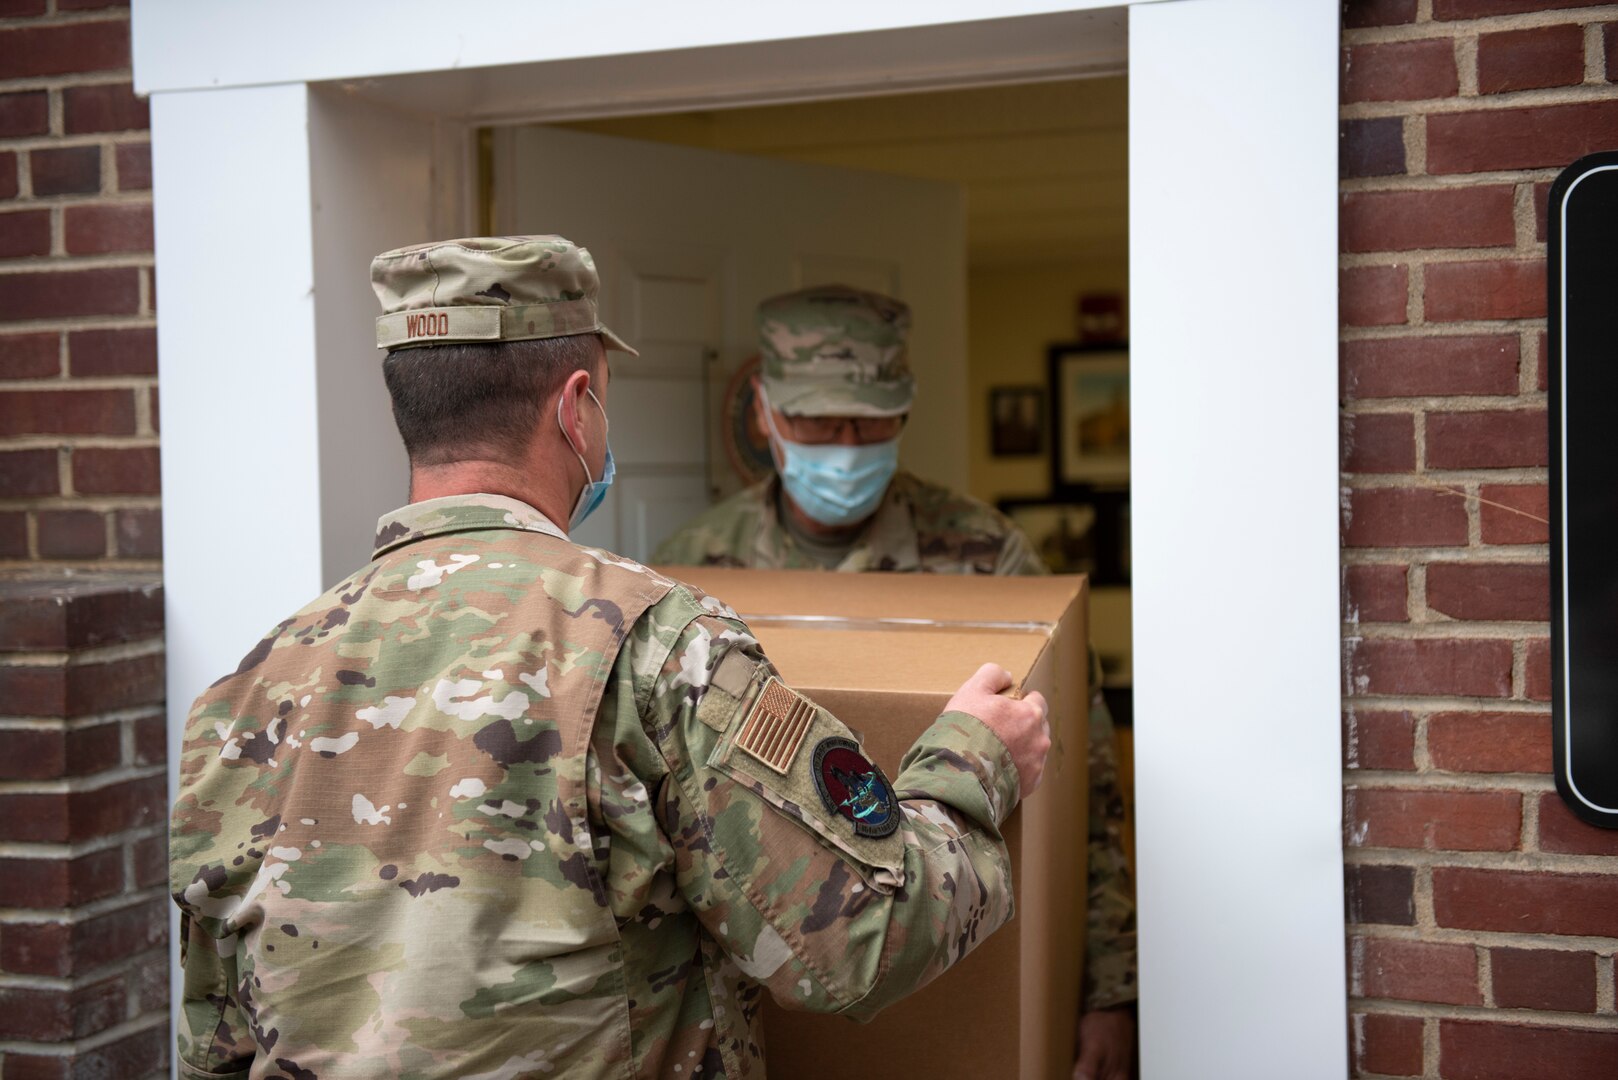 Staff Sgt. William Wood and Chief Master Sgt. Roland Shambaugh deliver personal protective equipment to the Morgan County Health Department, Berkeley Springs, W.Va., Sept. 29, 2020.